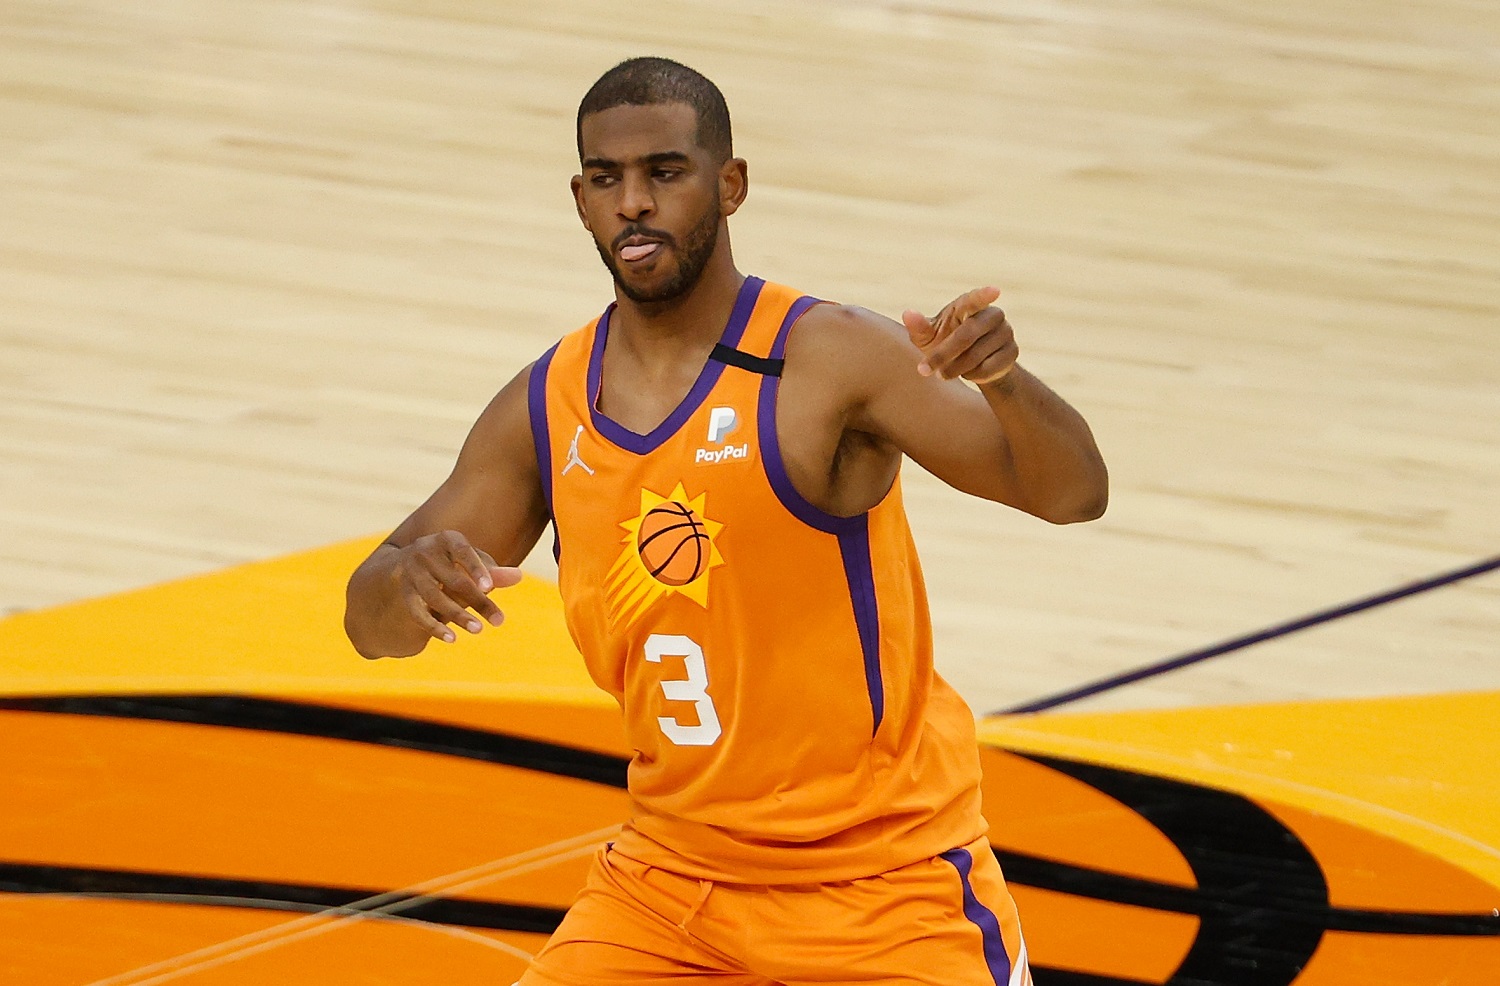 Phoenix Suns guard Chris Paul trolled the Minnesota Timberwolves while moving closer to 10,000 assists in his NBA career.